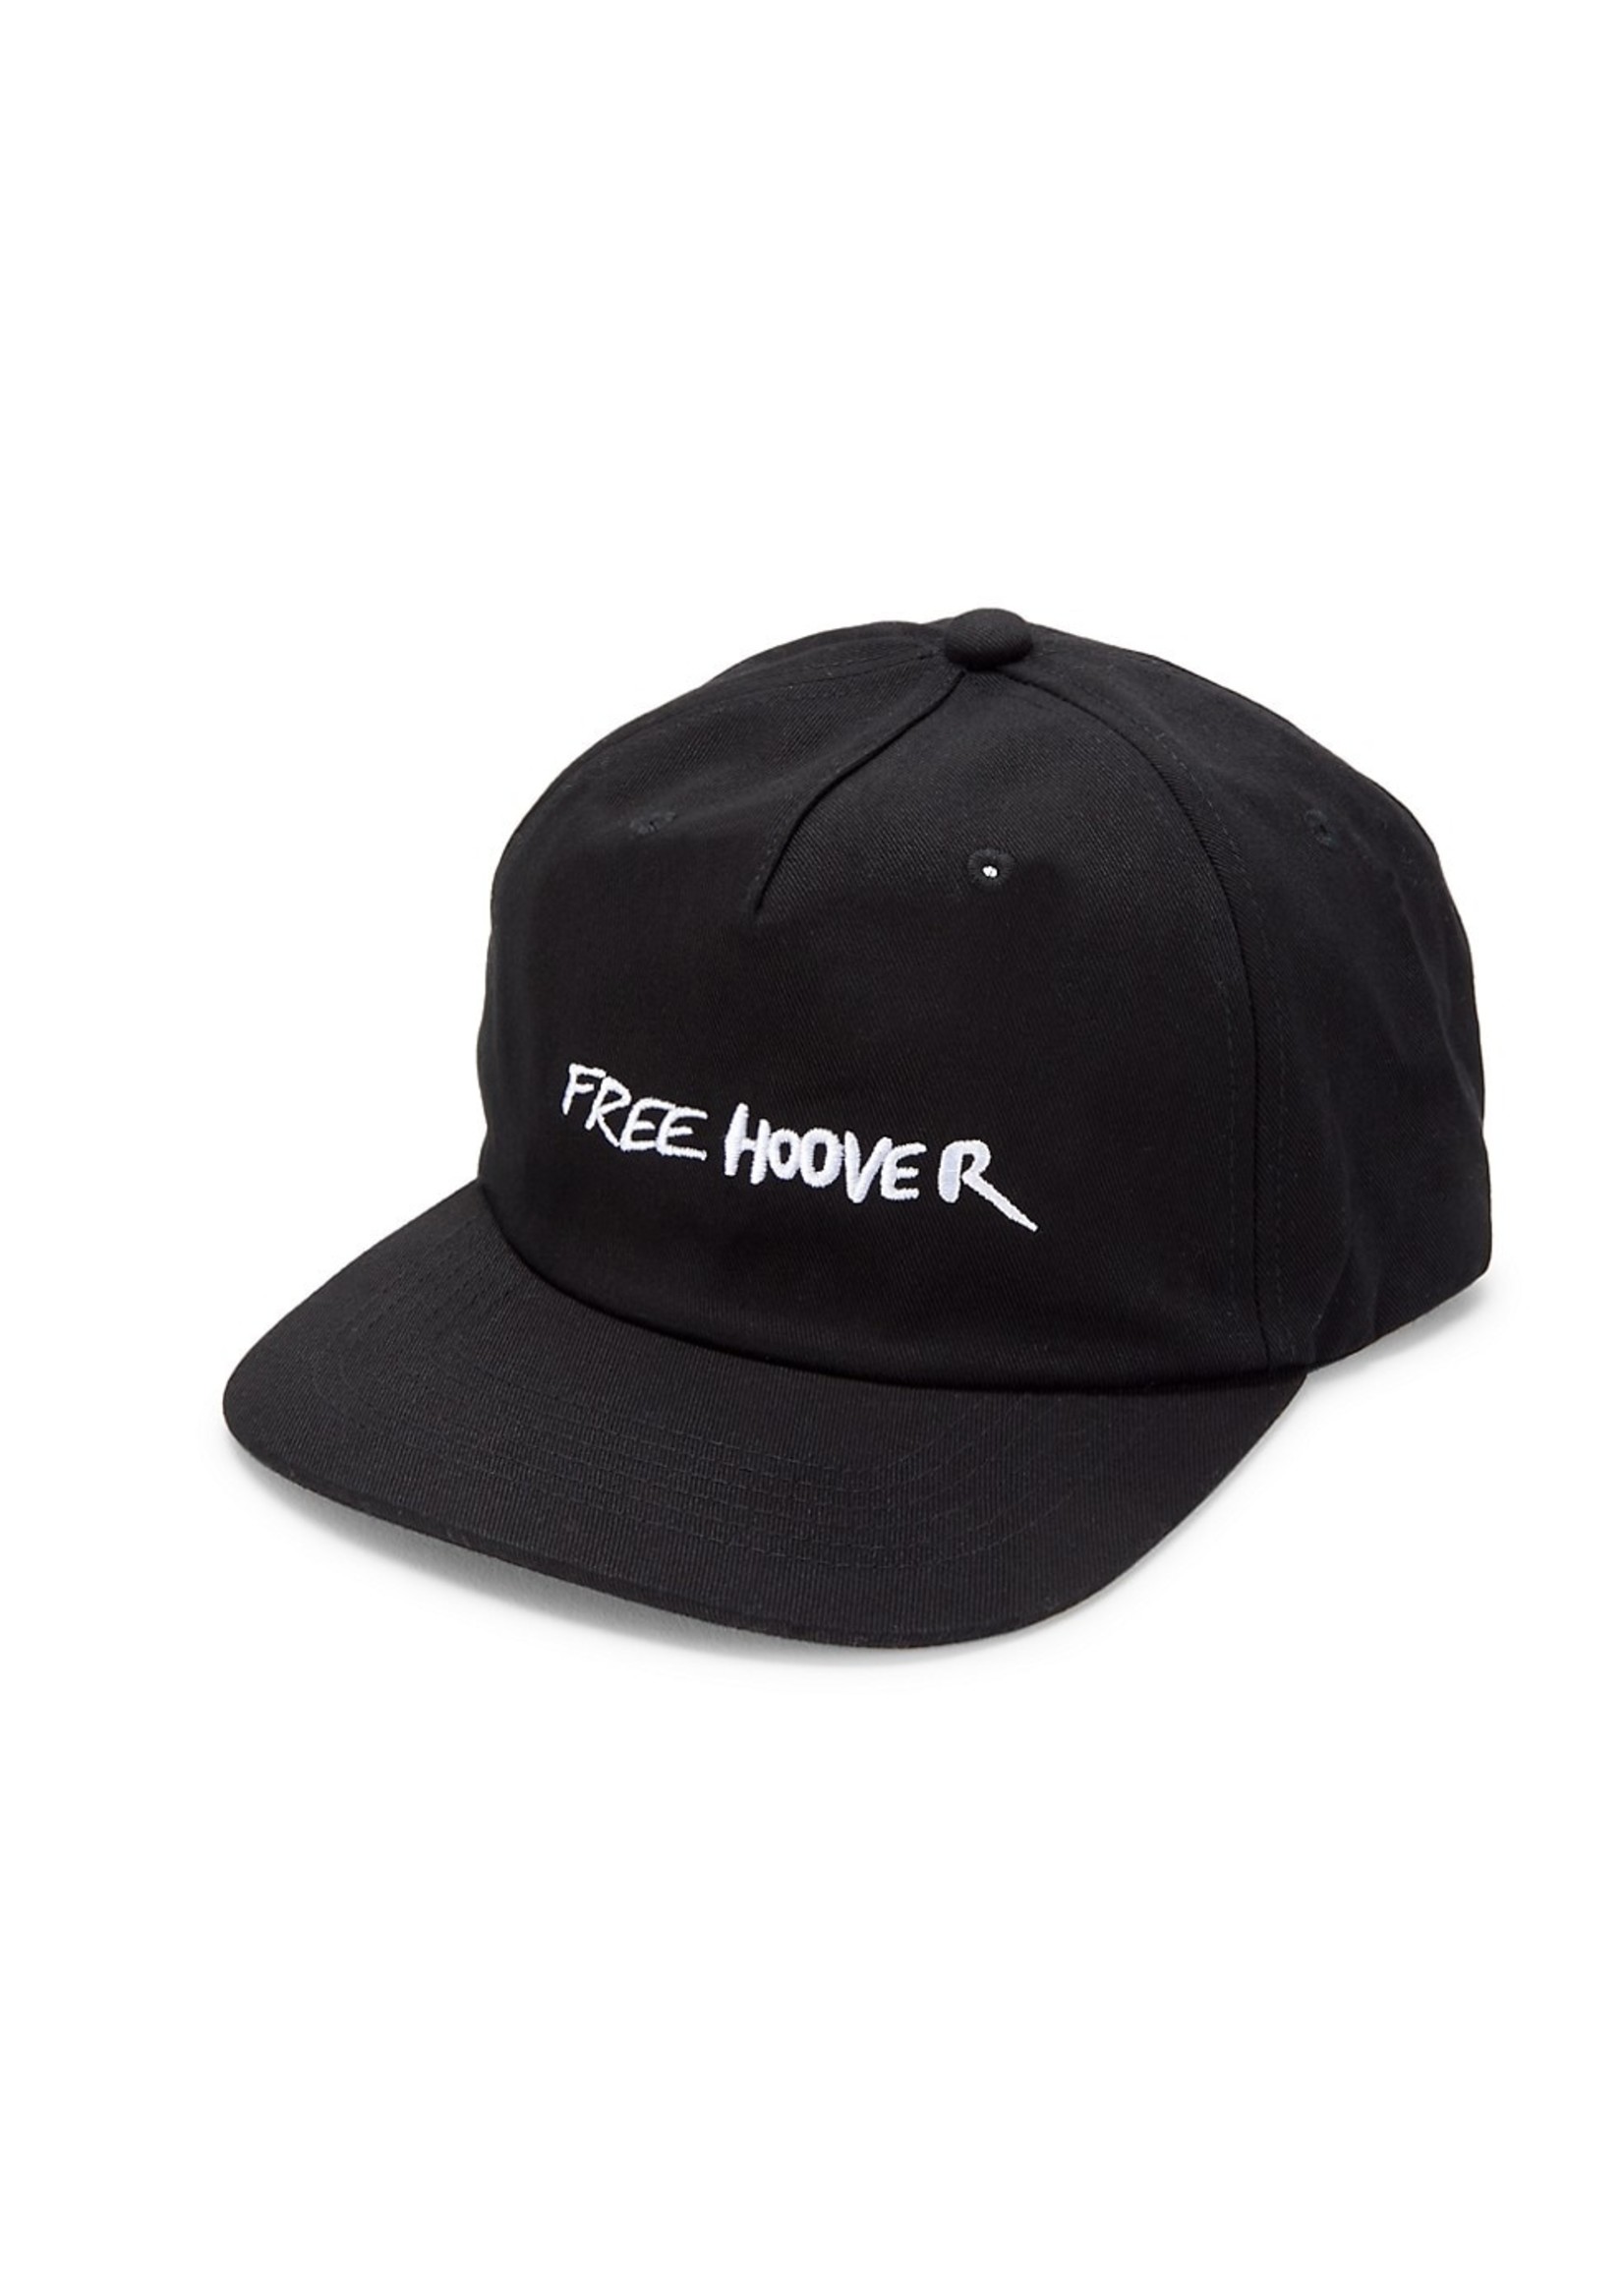 FREE HOOVER FREE HOOVER HAT